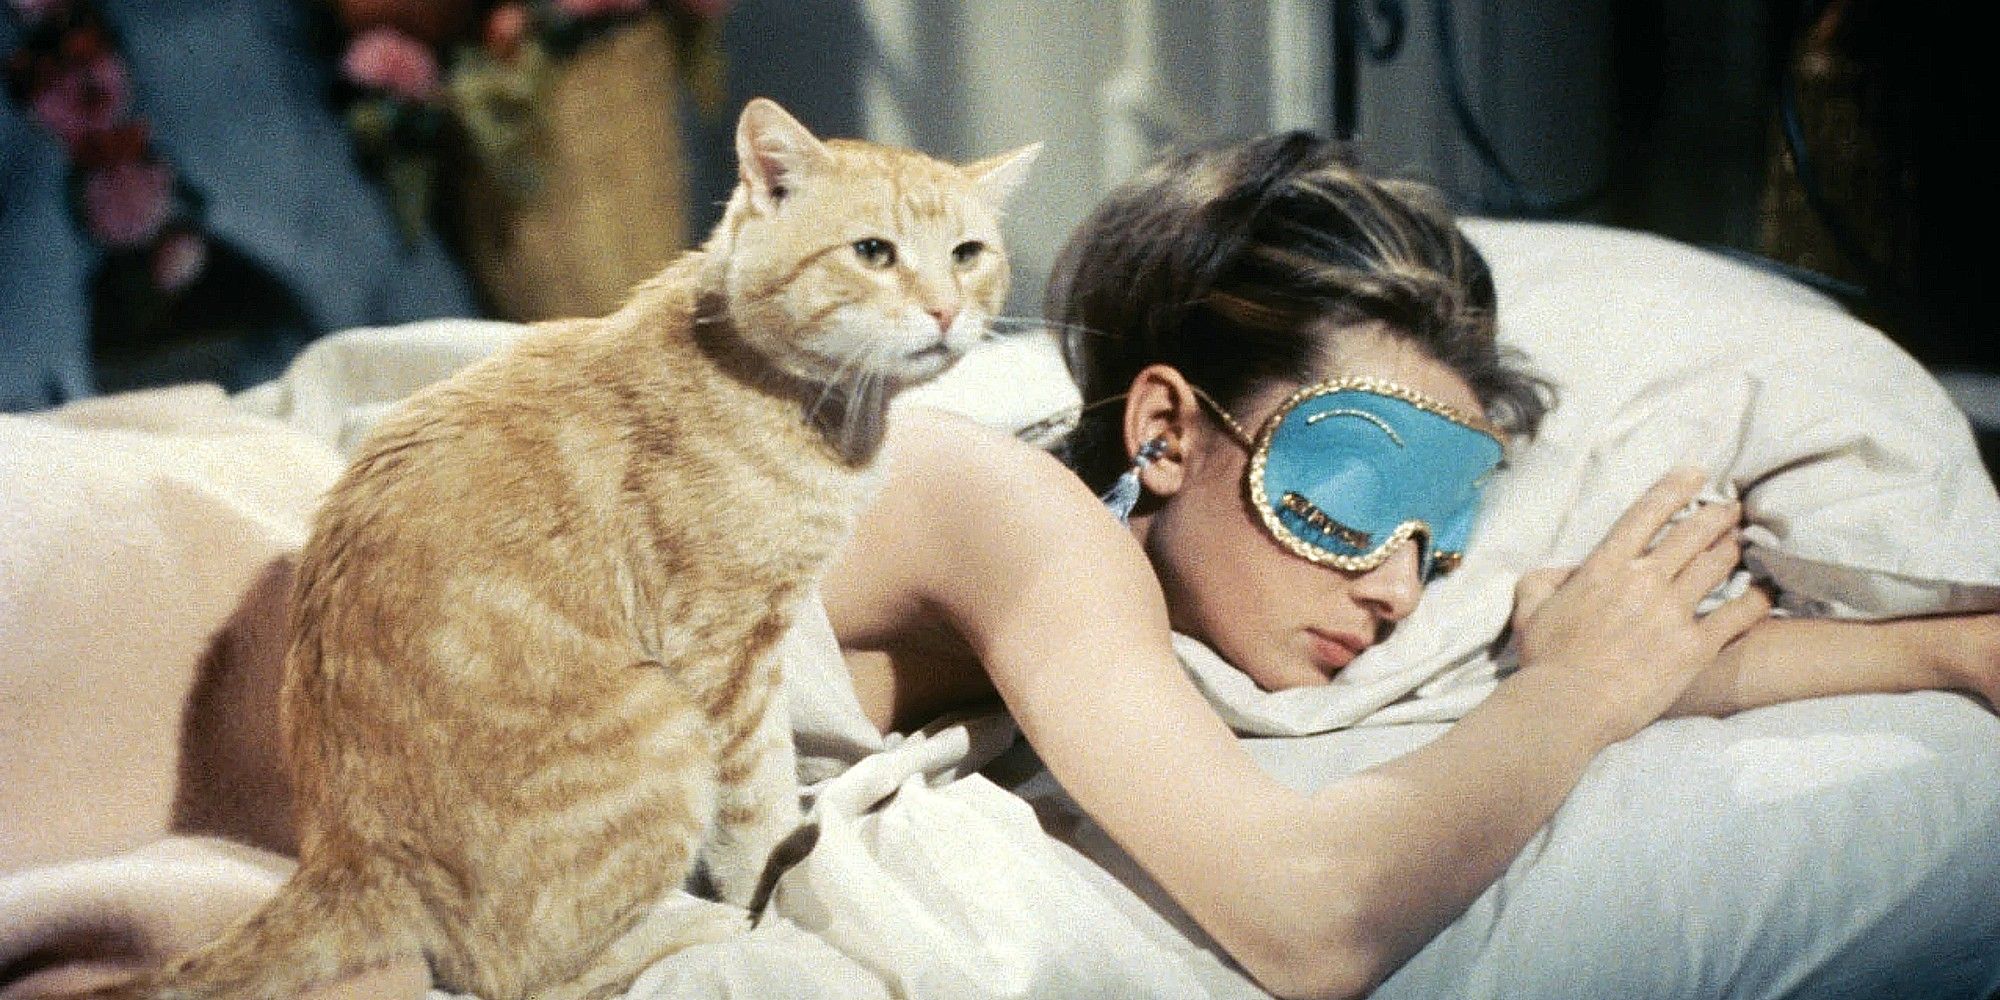 Audrey Hepburn lying down with a cat on her side in Breakfast at Tiffany's